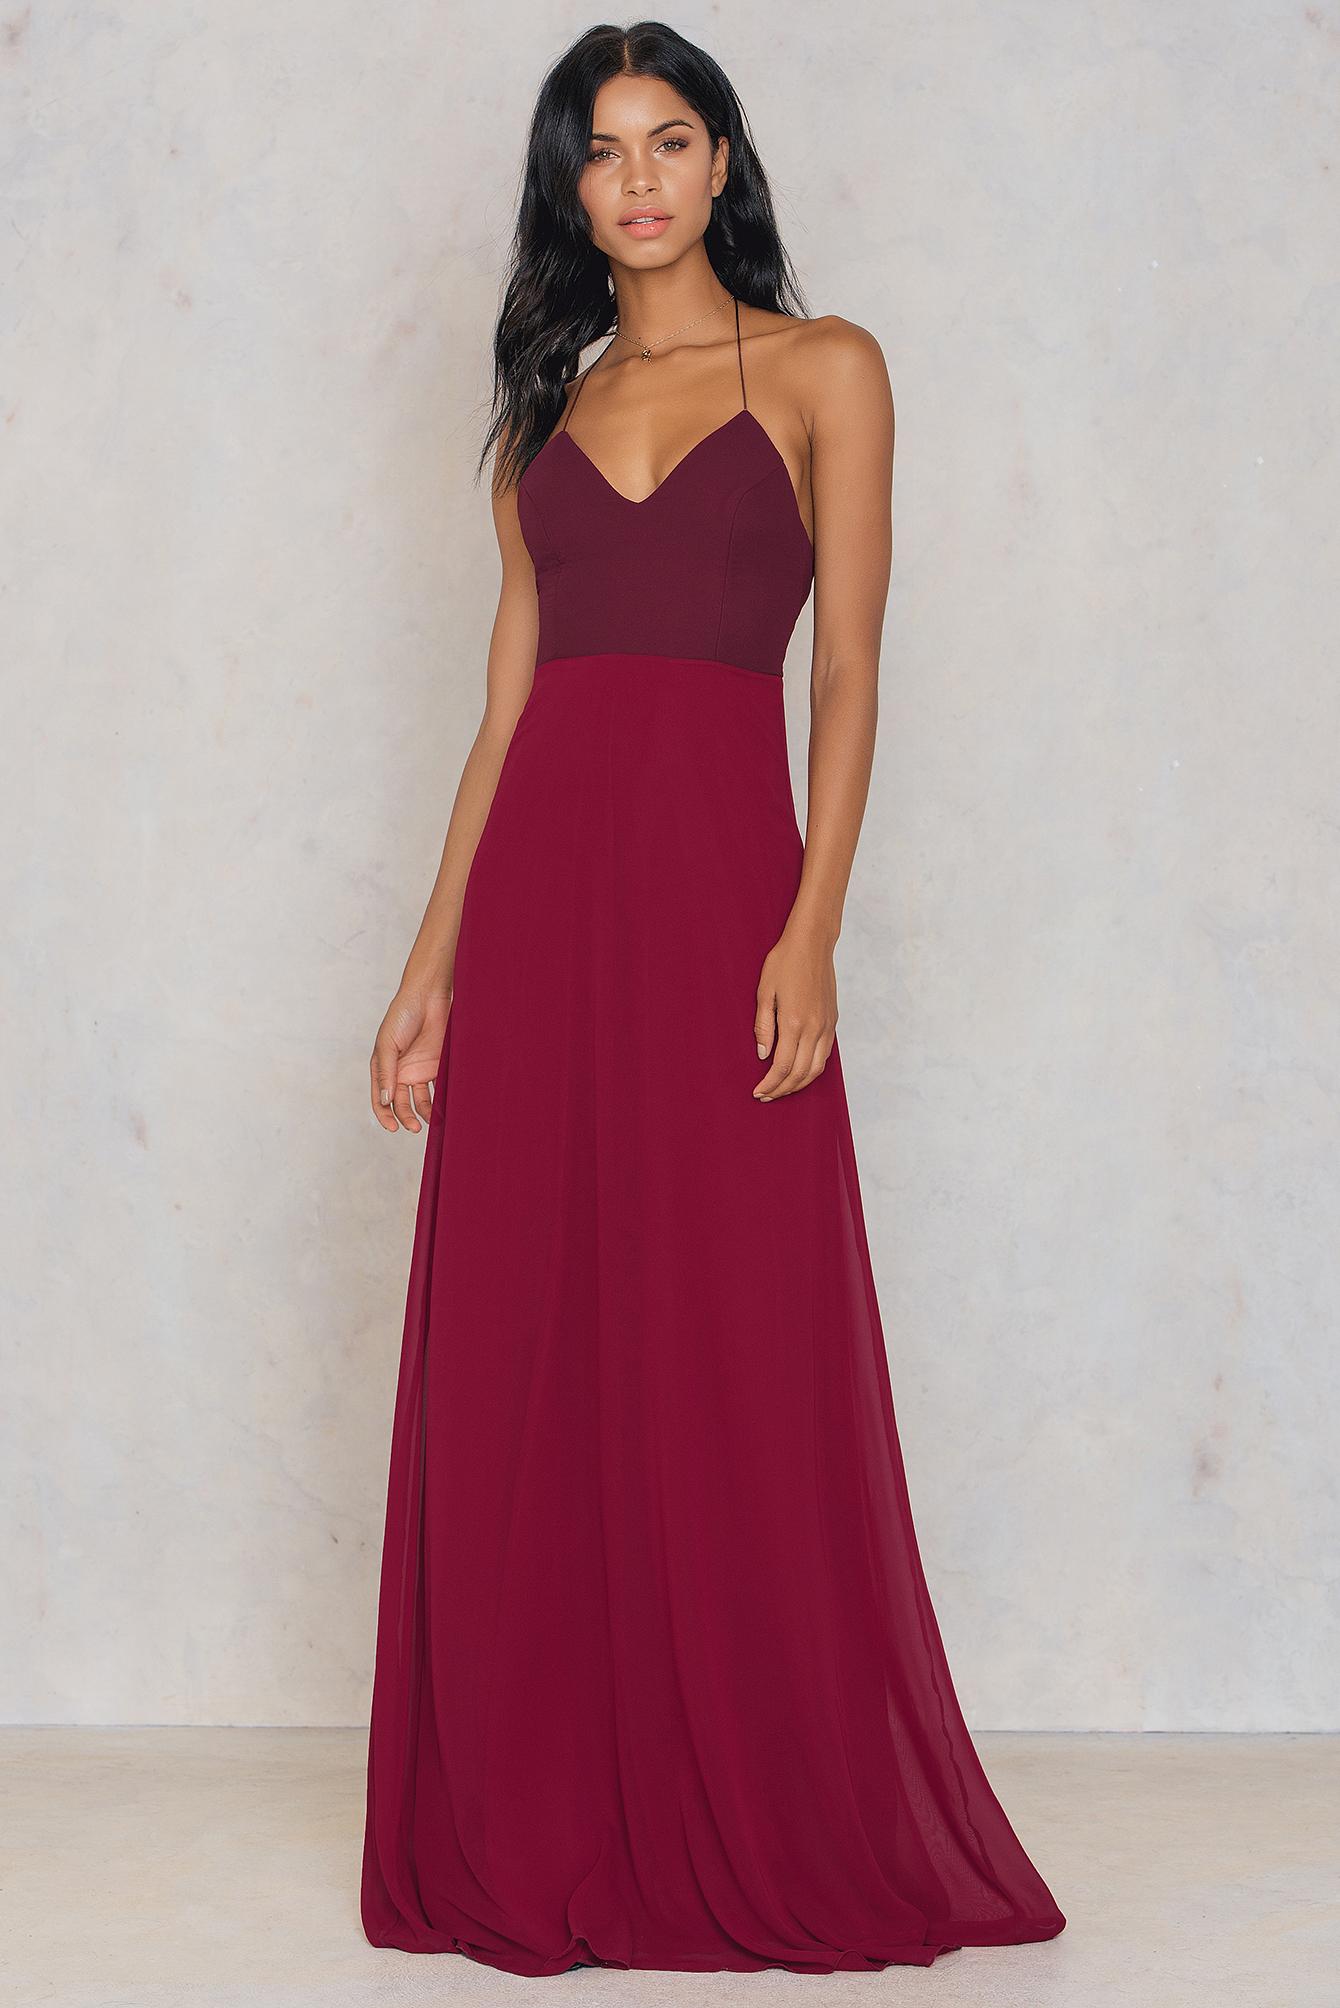 Trendyol Synthetic Thin Strap Maxi Dress in Burgundy (Red) - Lyst